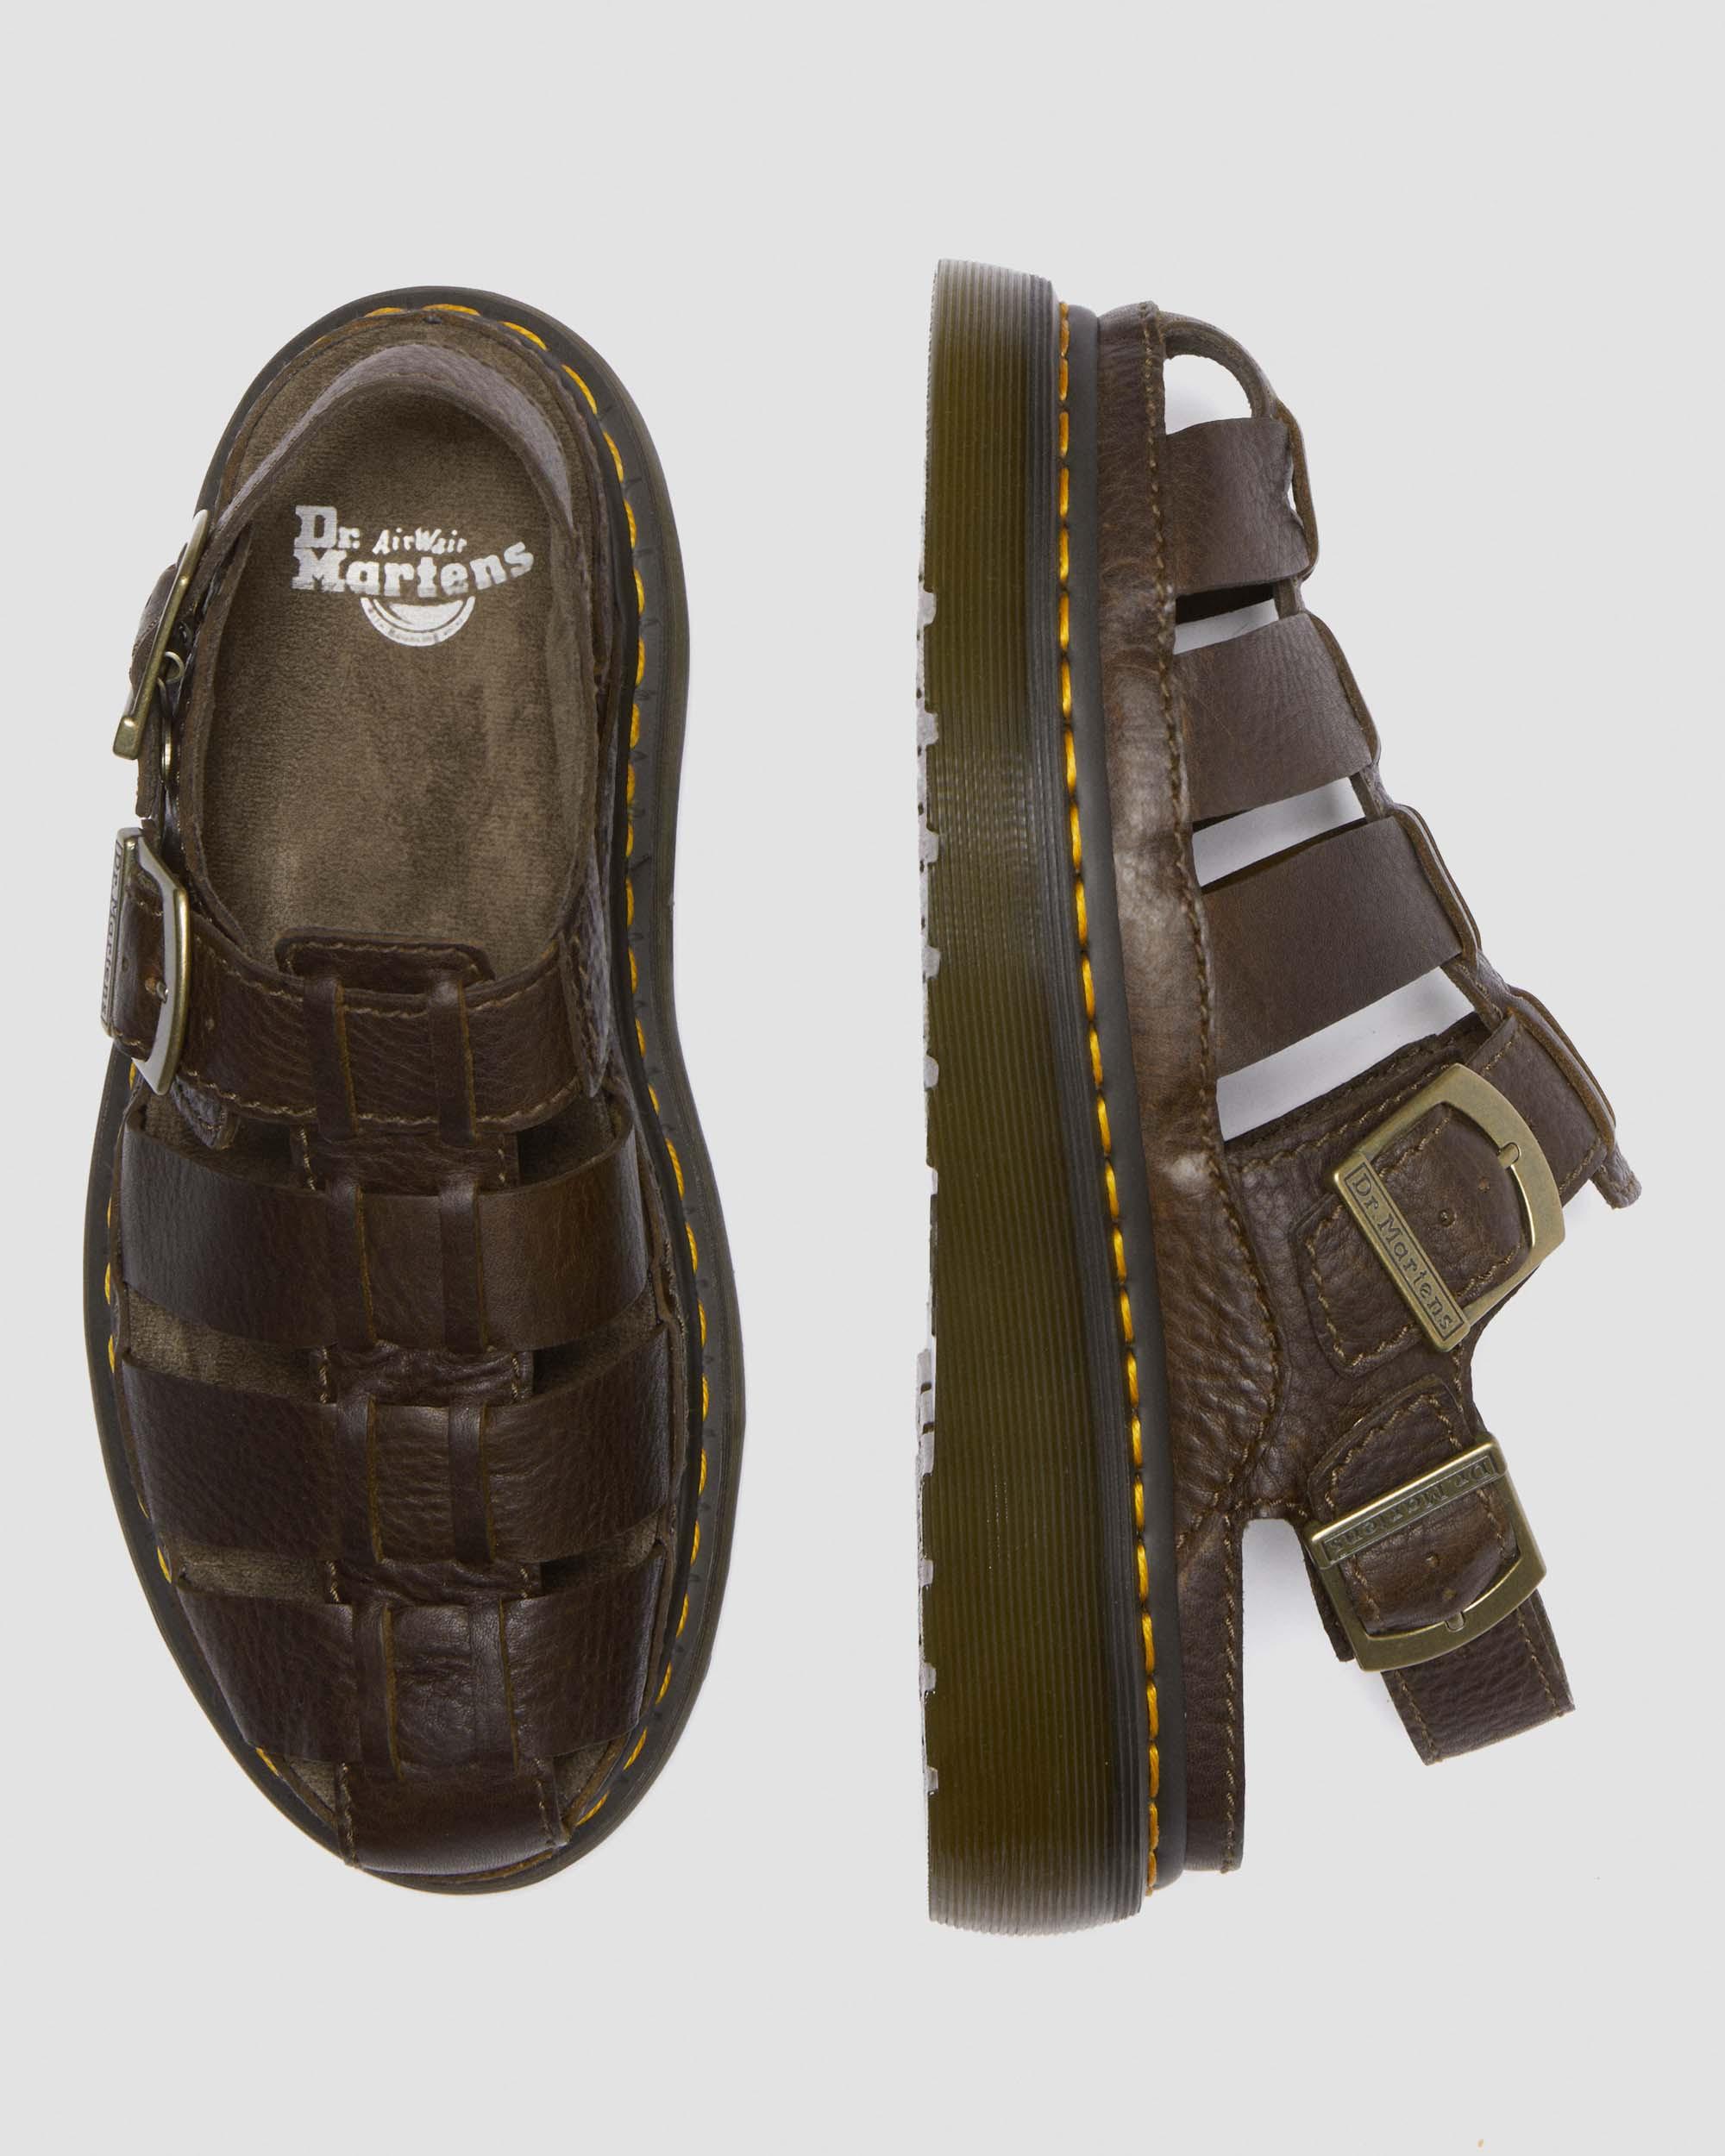 Wrenlie Grizzly Leather Fisherman Sandals in Dark Brown